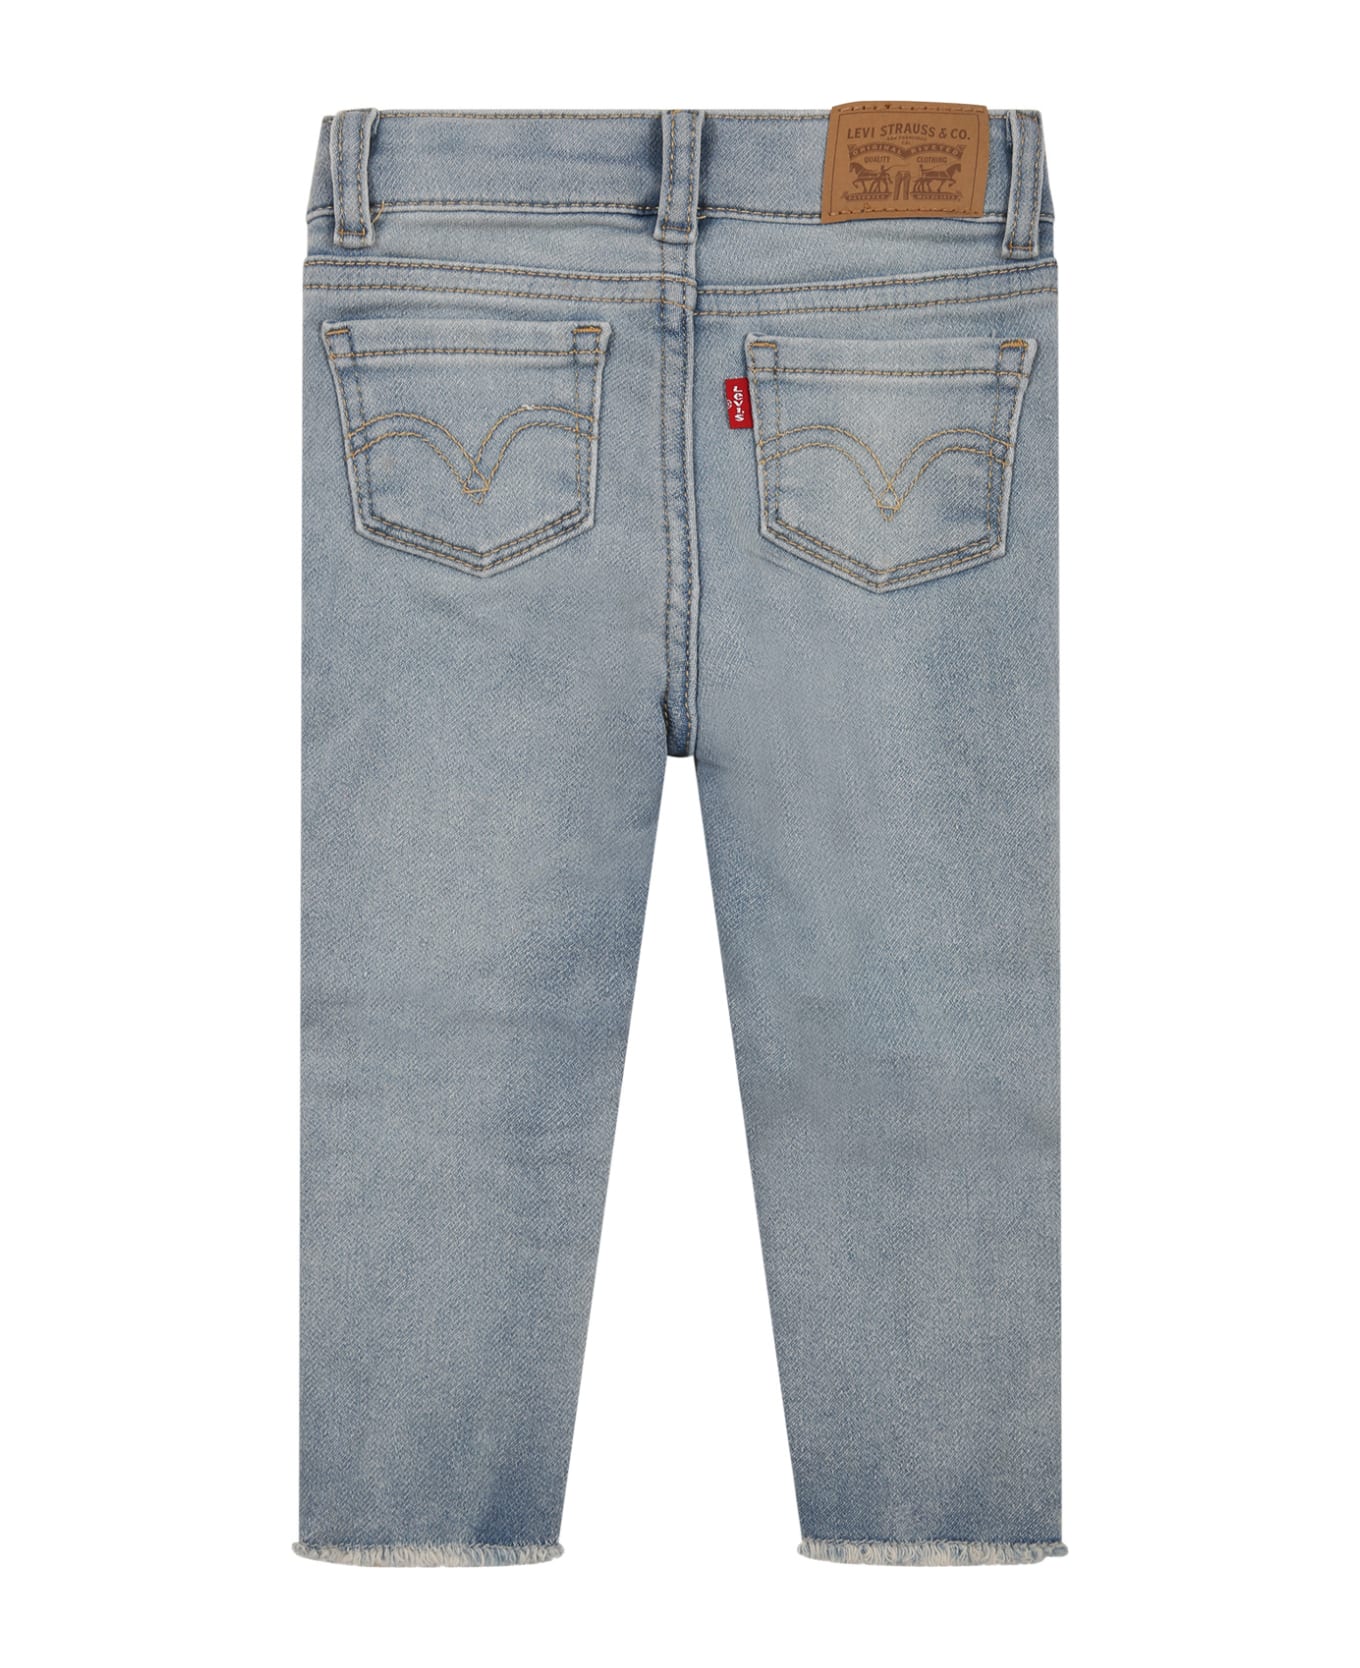 Levi's Gray Jeans For Baby Girl With Patch Logo - Denim